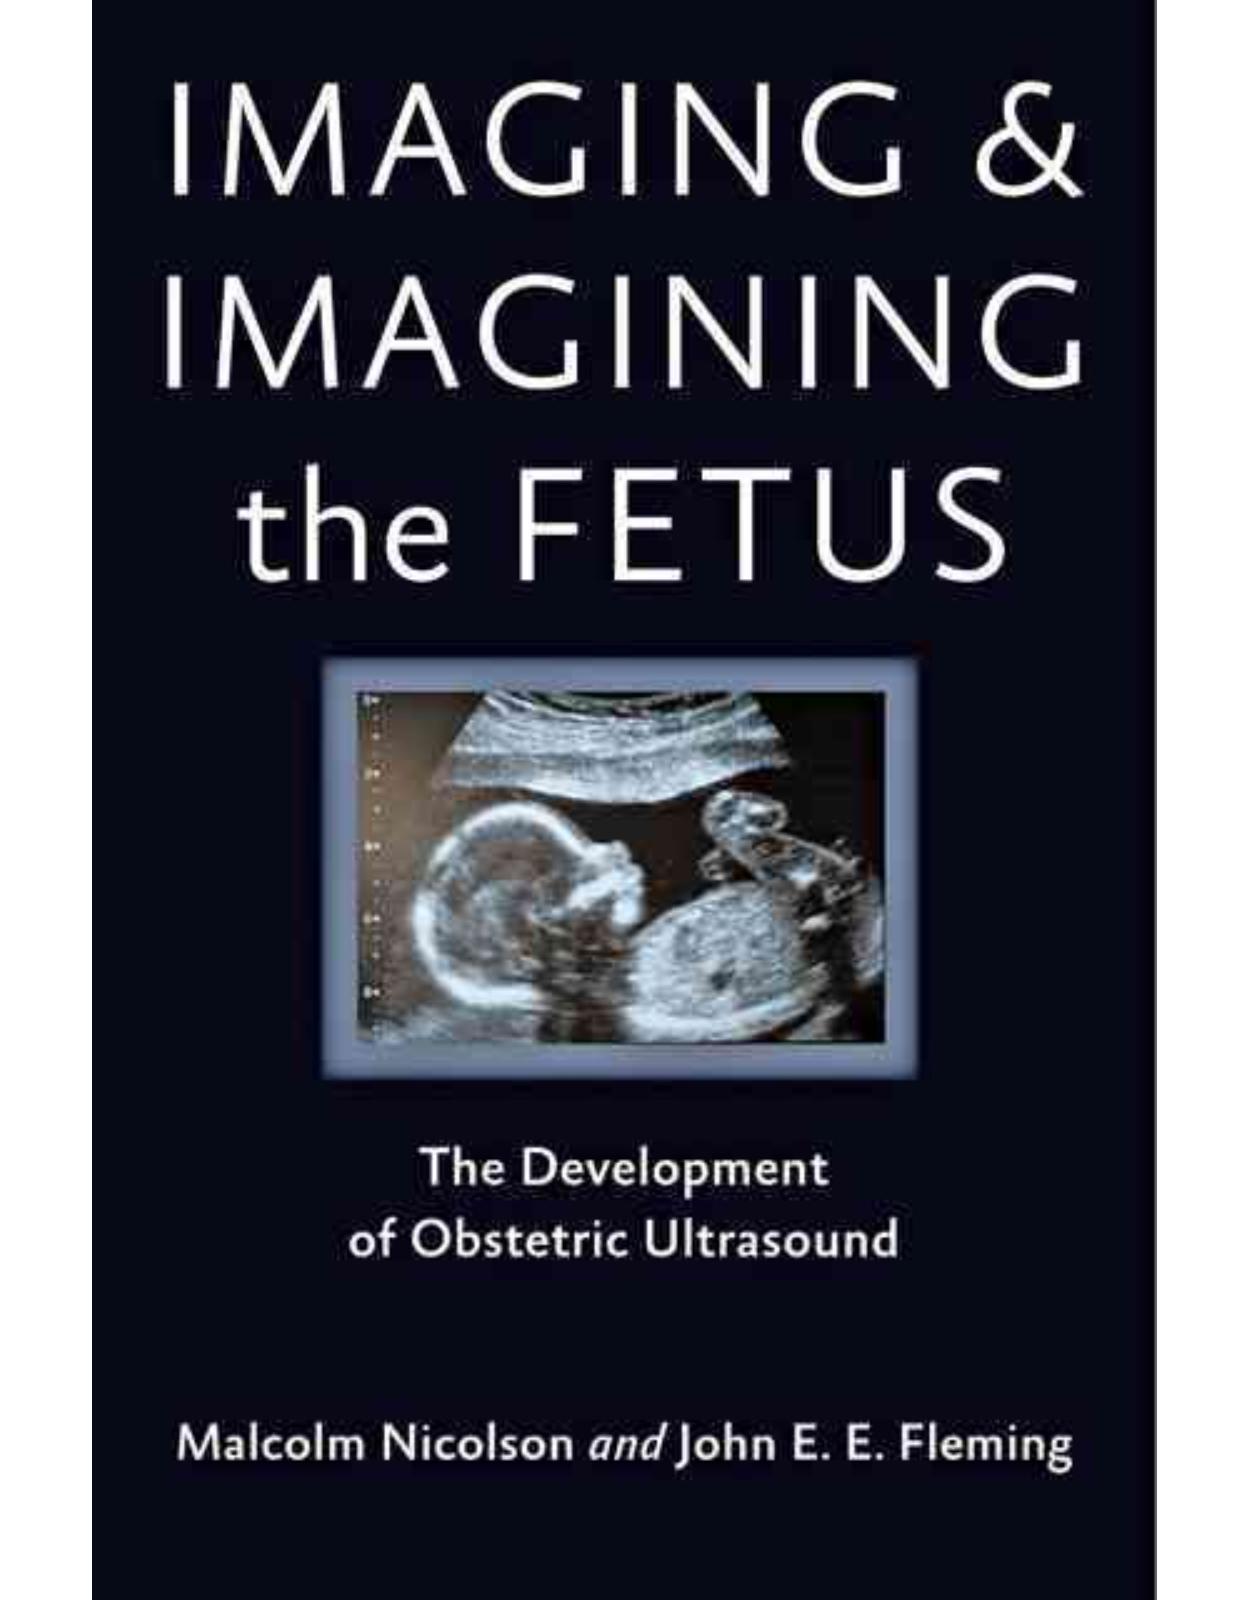 Imaging and Imagining the Fetus. The Development of Obstetric Ultrasound